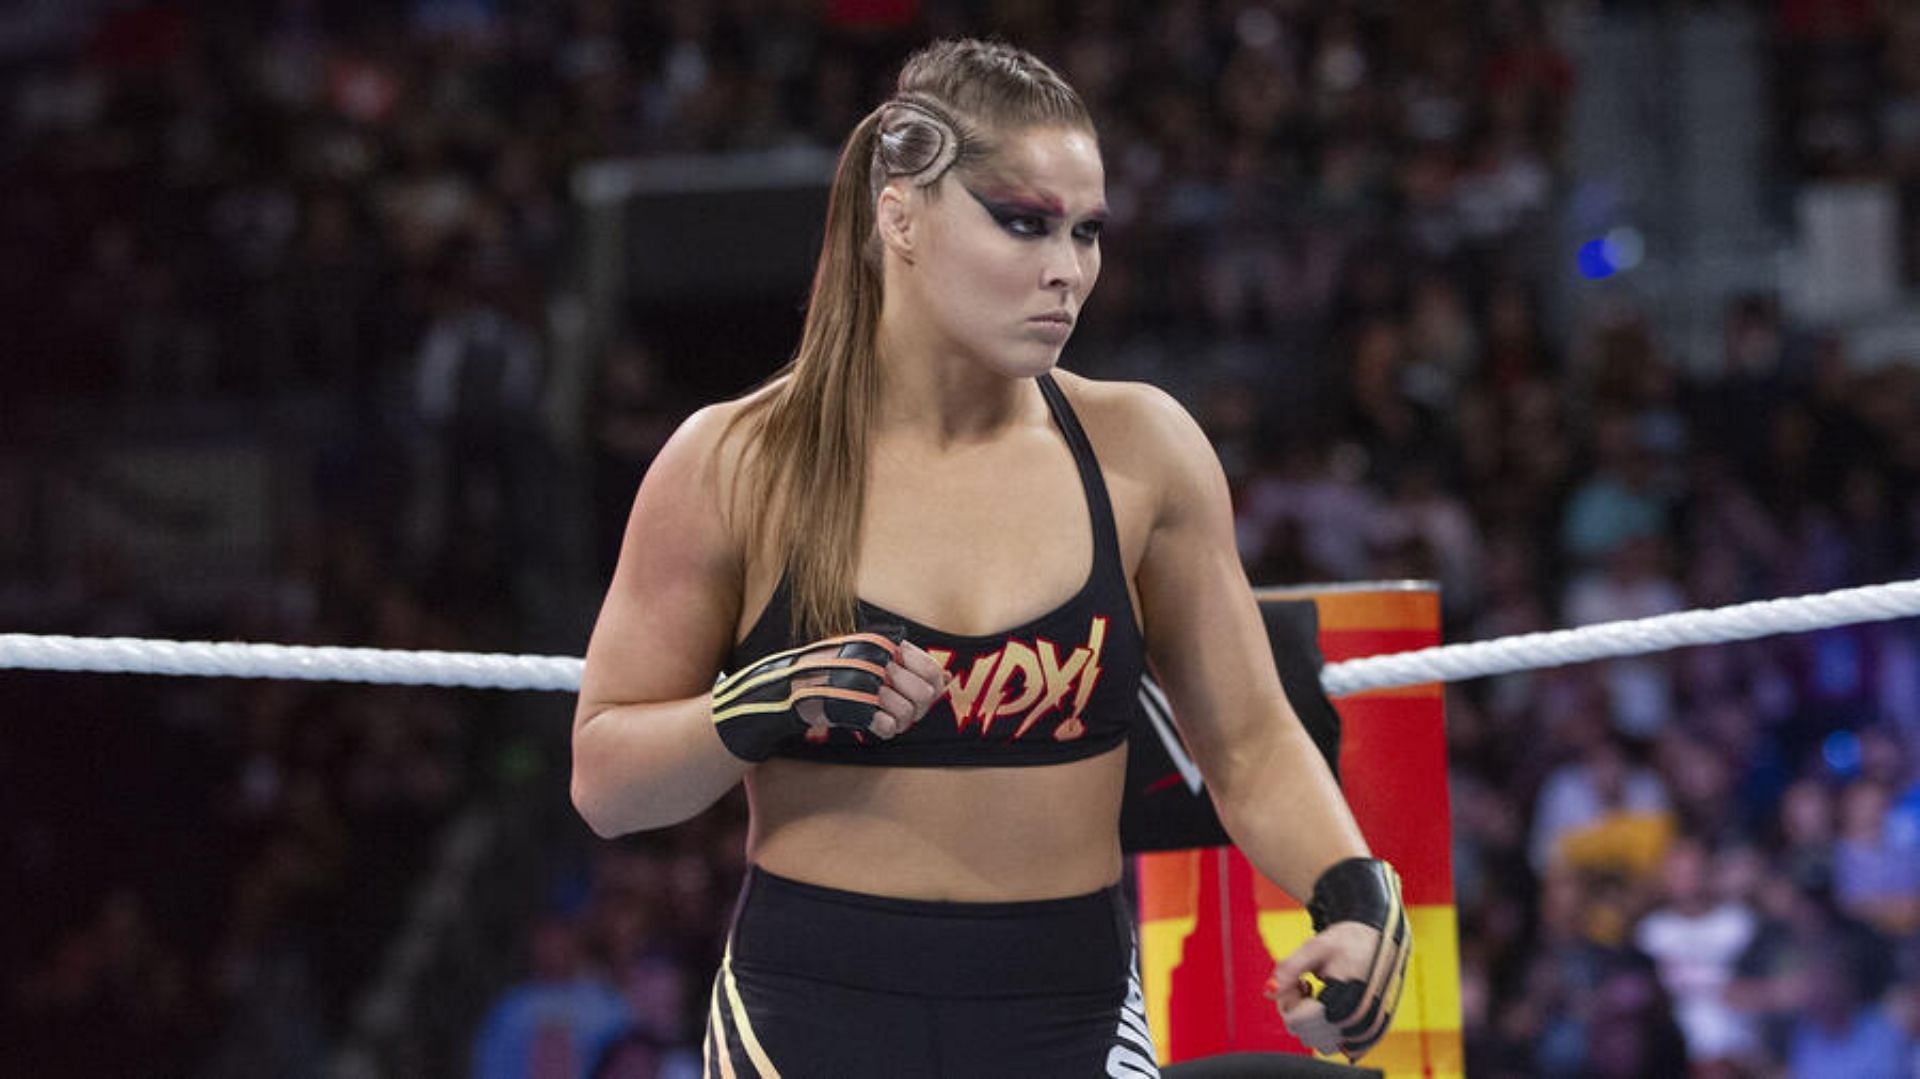 Will Ronda Rousey ever return to WWE?